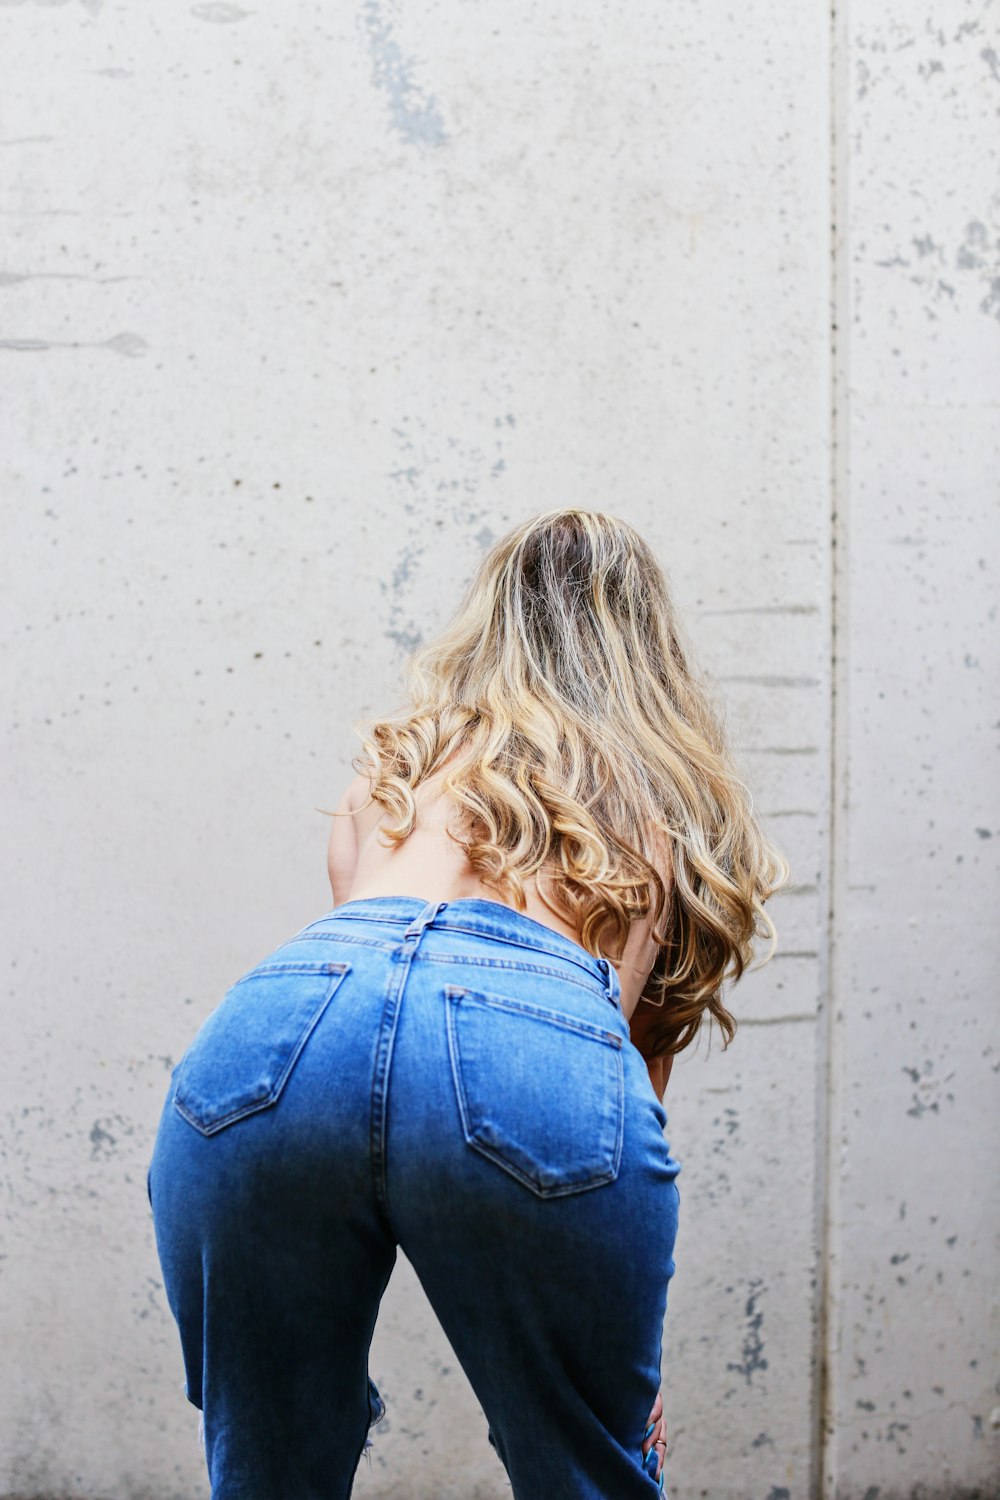 1500+ Girls In Jeans Pictures | Download Images on Unsplash